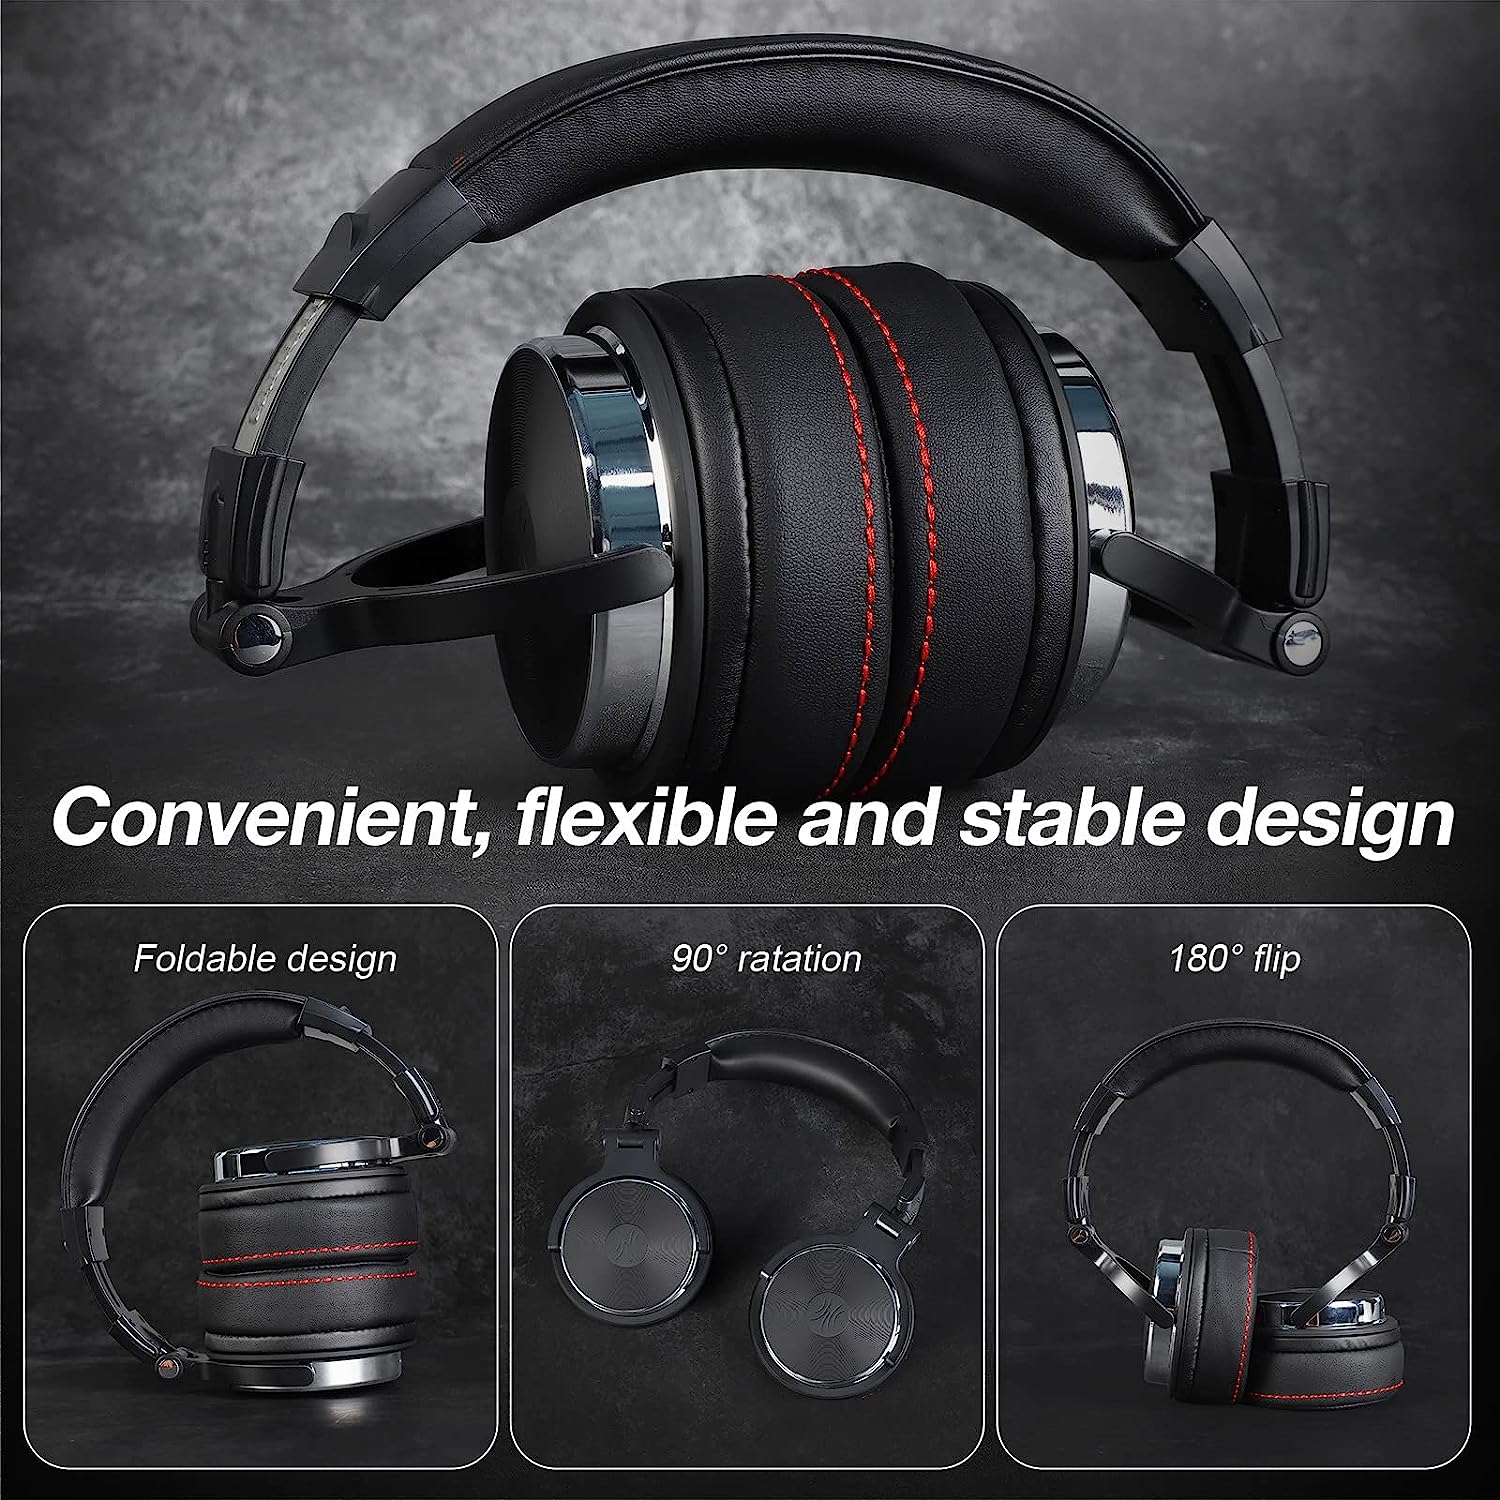 OneOdio Adapter-Free Over Ear Headphones for Studio Monitoring and Mixing, Sound Isolation, 90° Rotatable Housing with Top Protein Leather Earcups, 50mm Driver Unit, Wired Headsets with Mic (Pro-50)